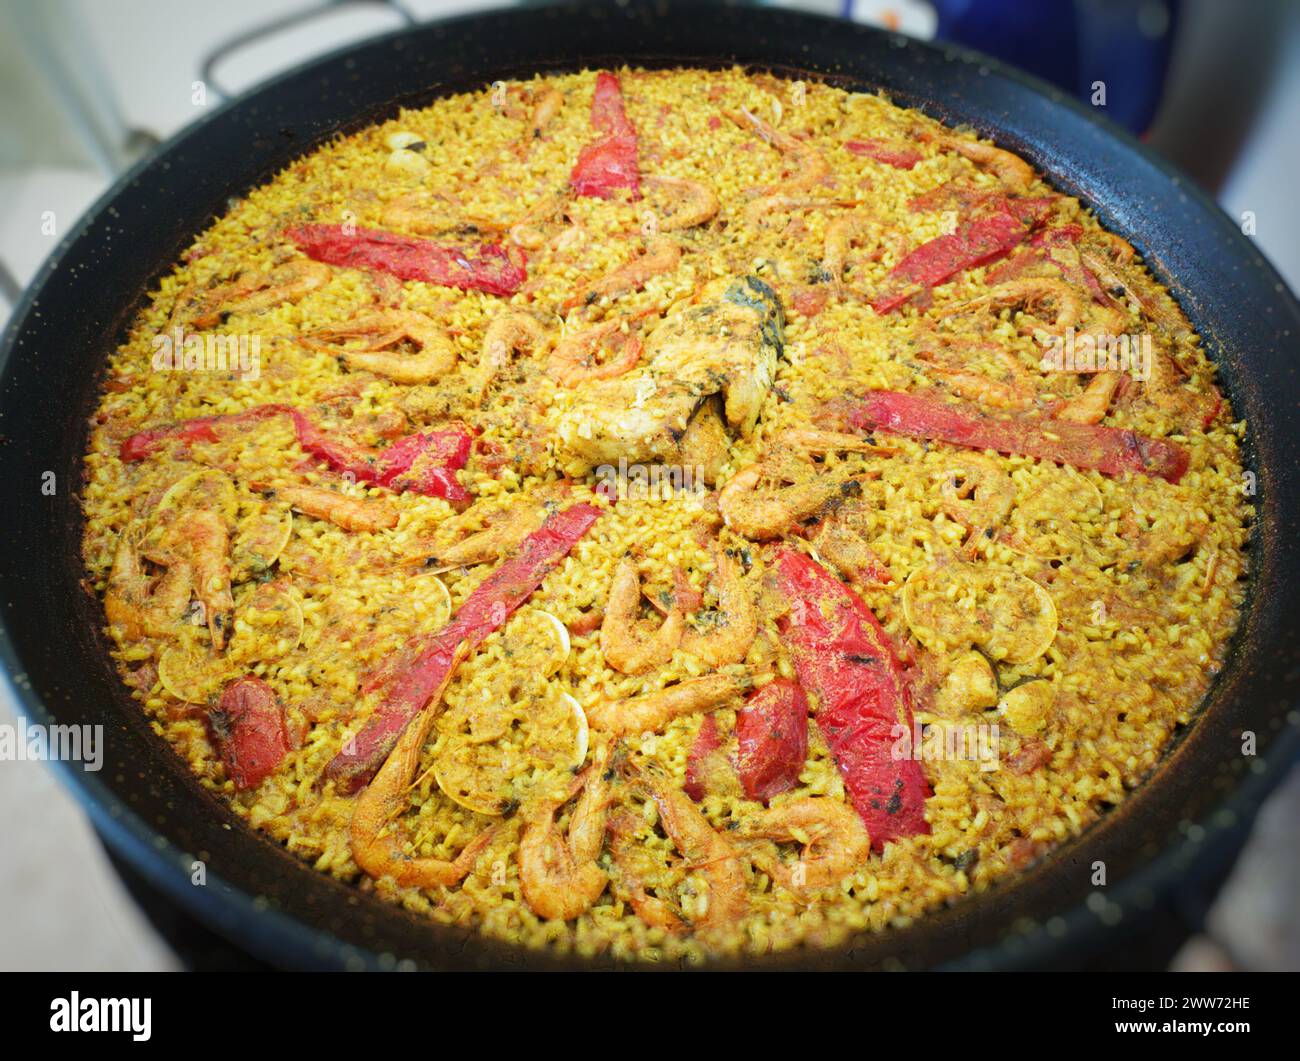 Homemade seafood rice called paella in Spain. Stock Photo